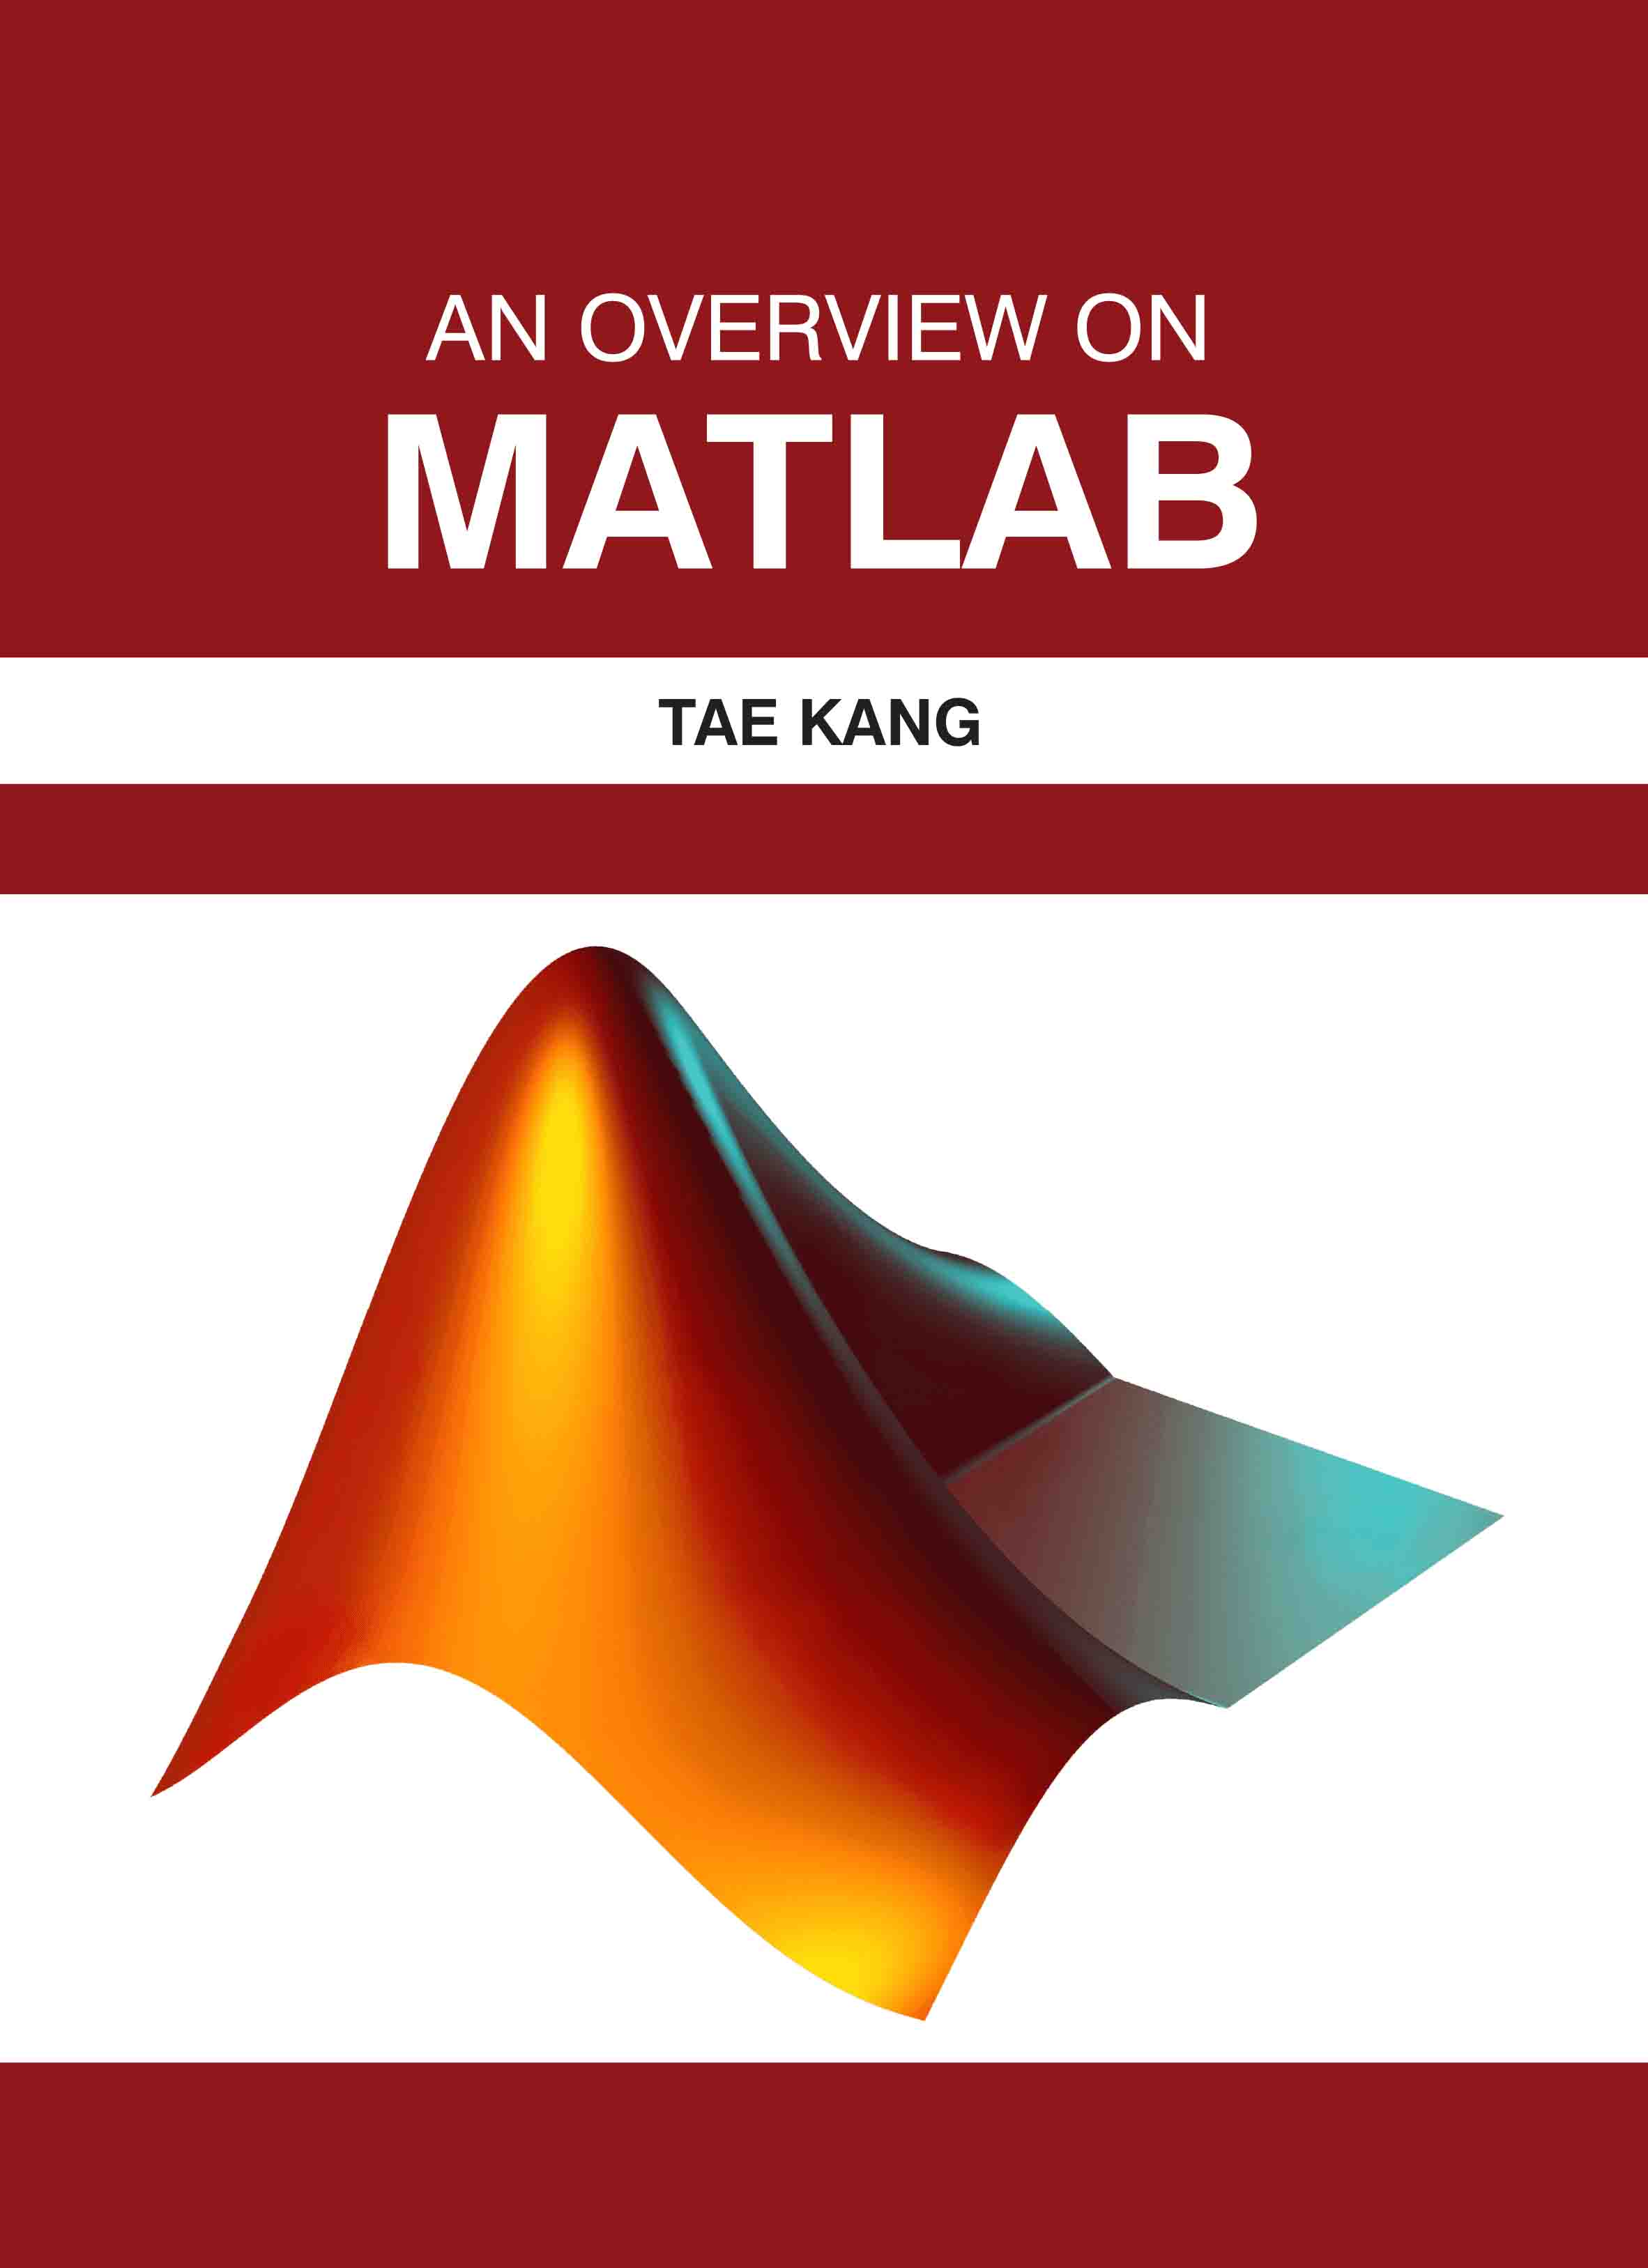 An Overview on MATLAB